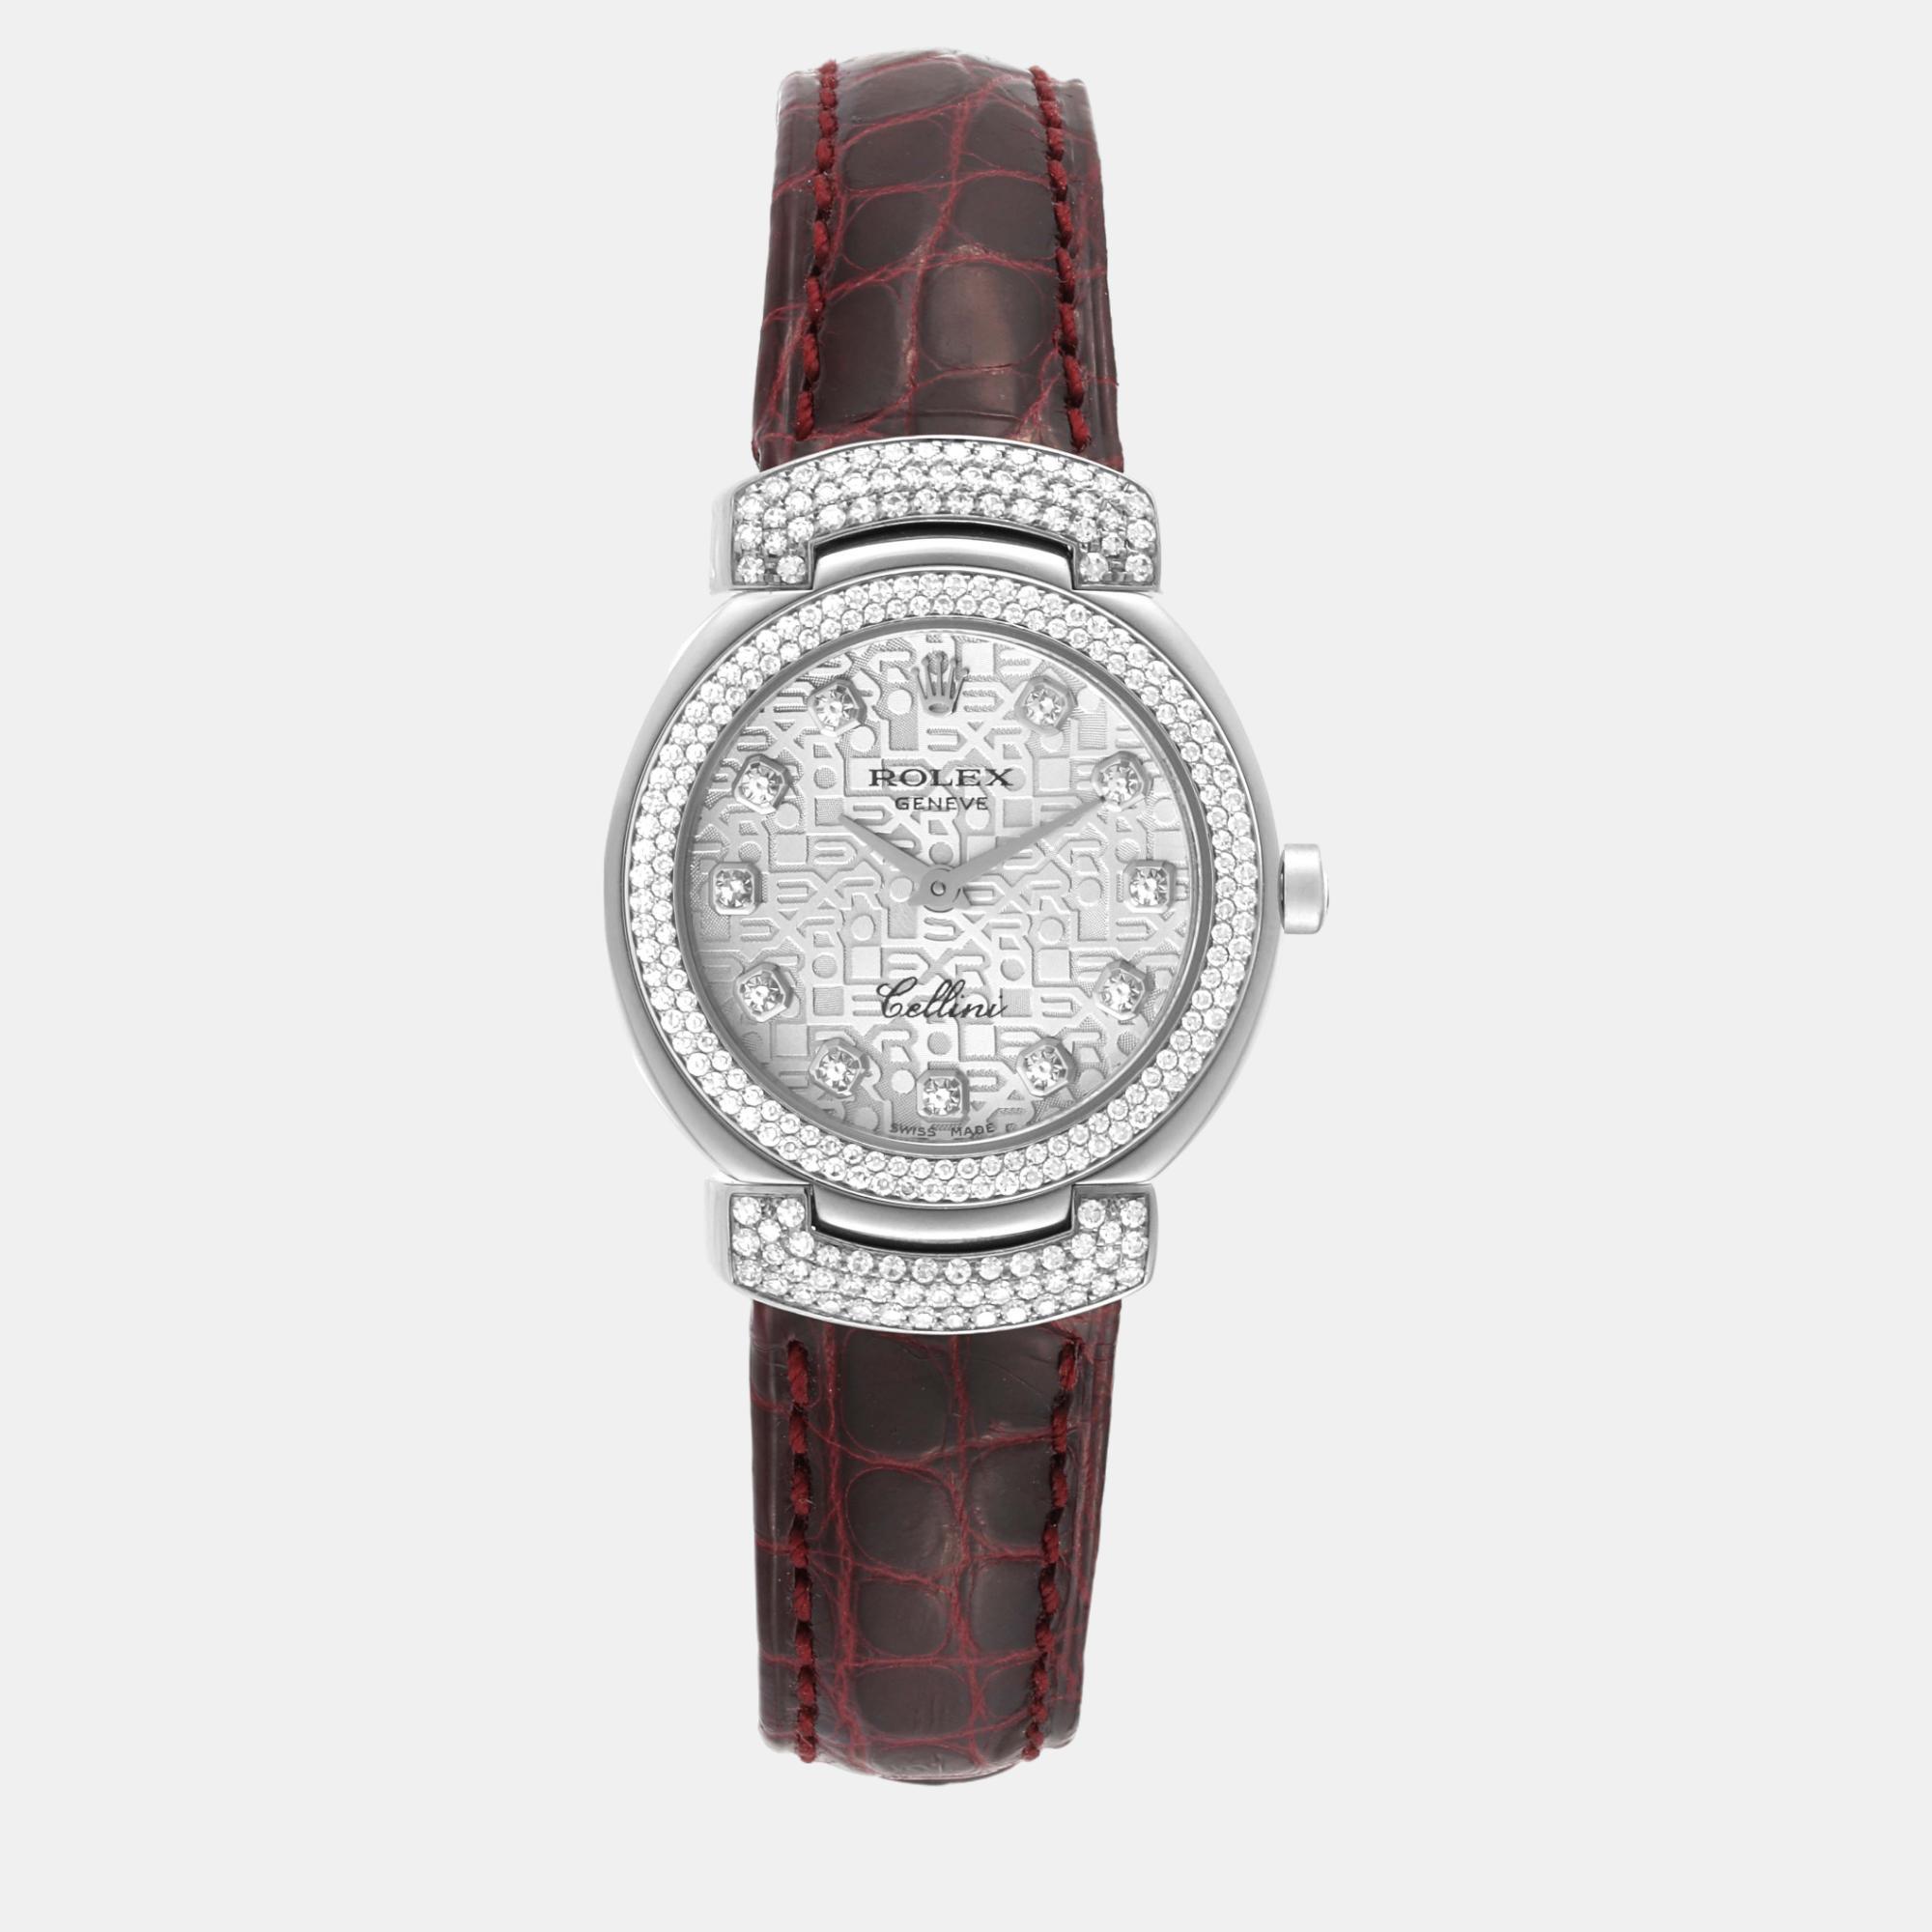 Pre-owned Rolex Cellini Cellissima White Gold Anniversary Diamond Dial Ladies Watch 6673 In Silver